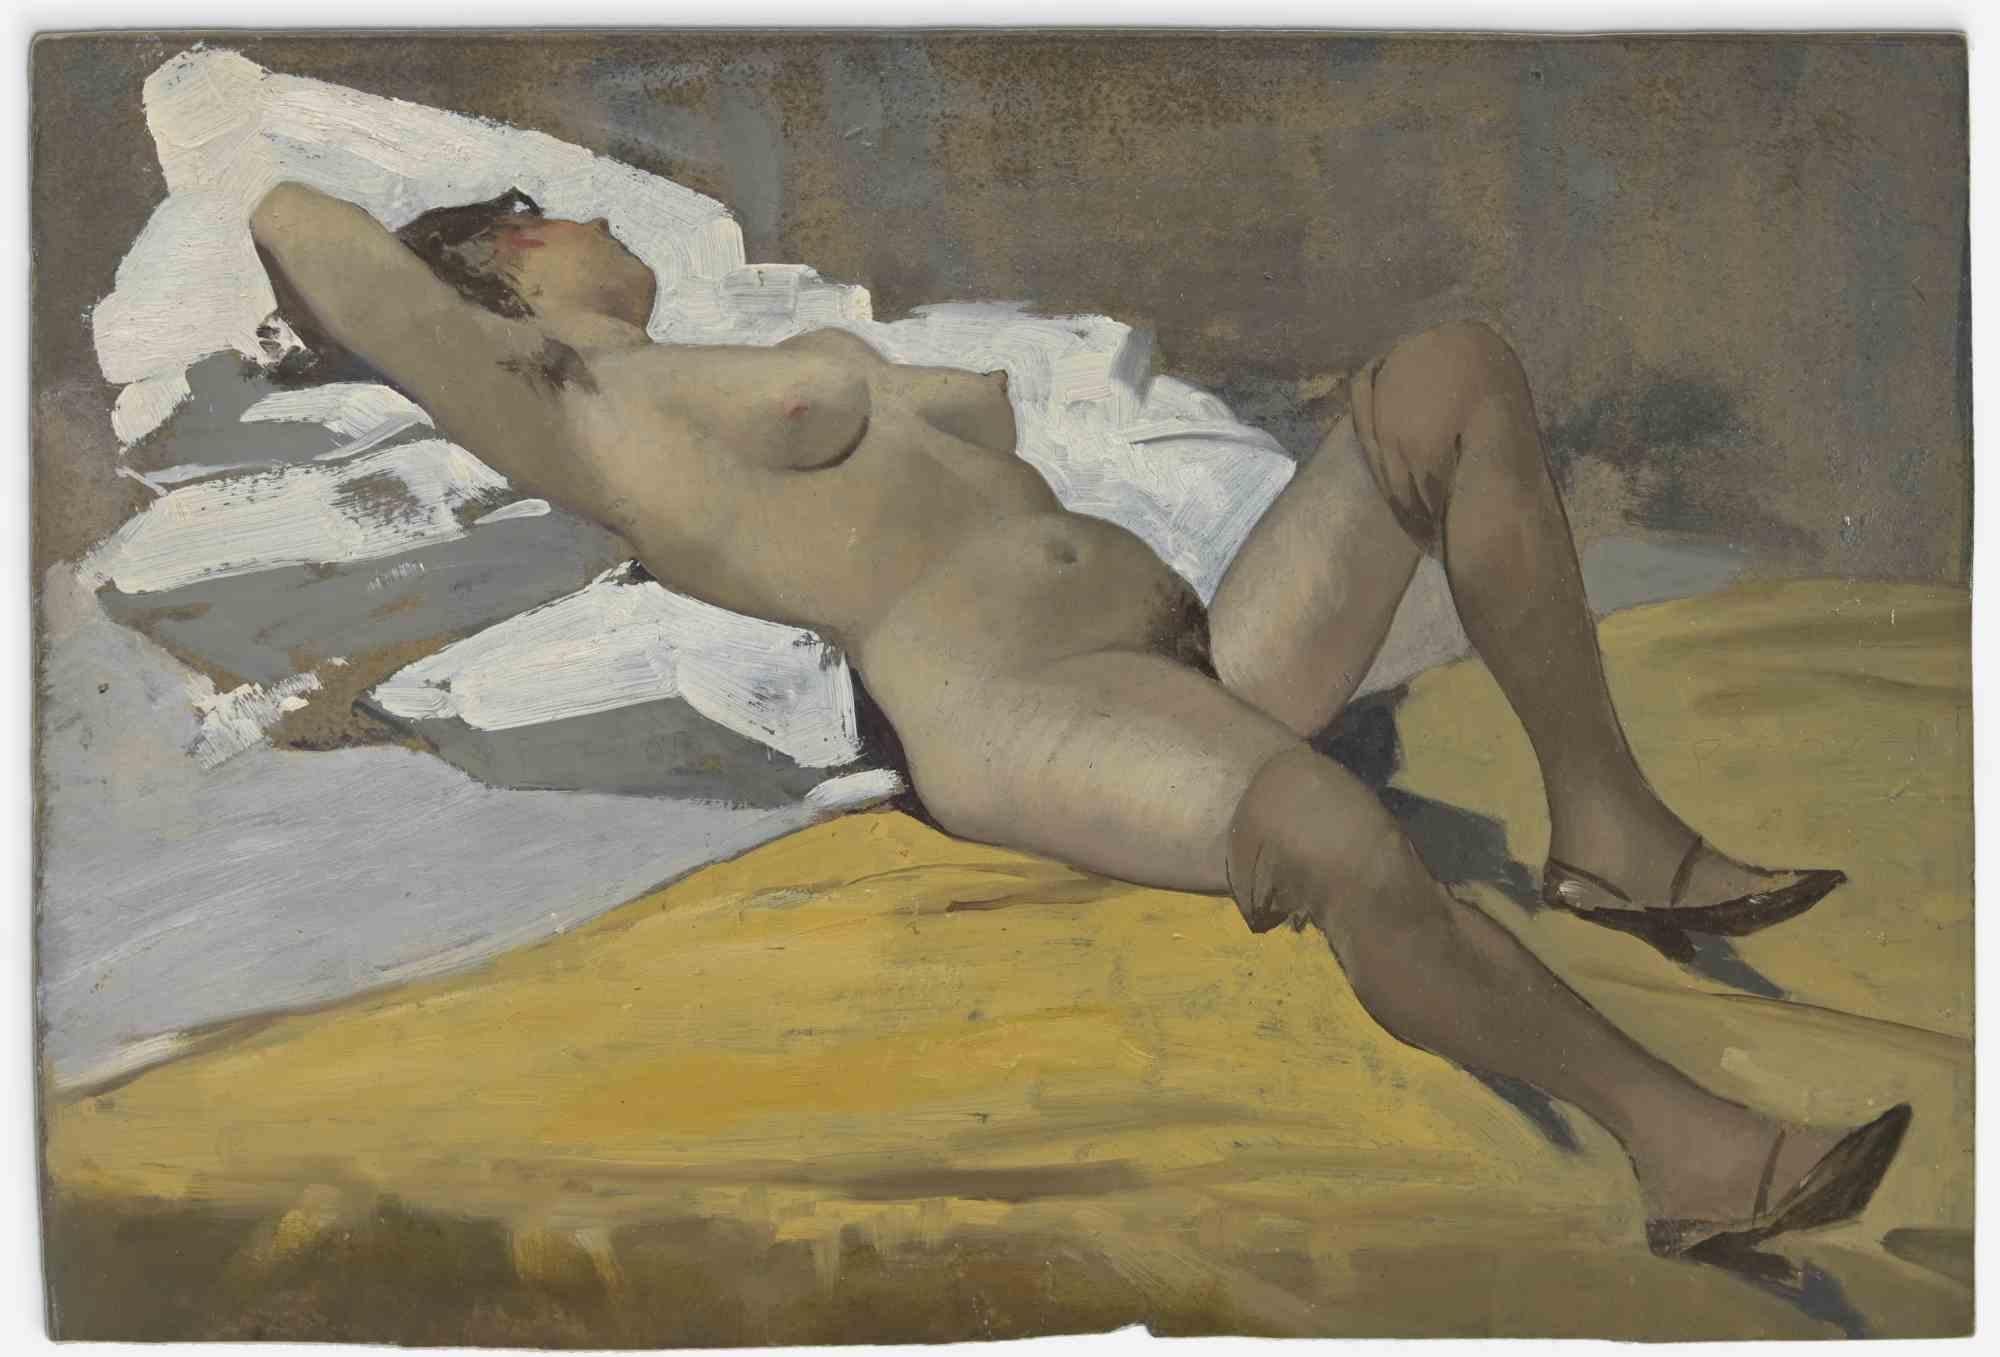 Unknown Figurative Painting - Woman Lying Down on White Cloth - Oil Painting - Mid-20th Century